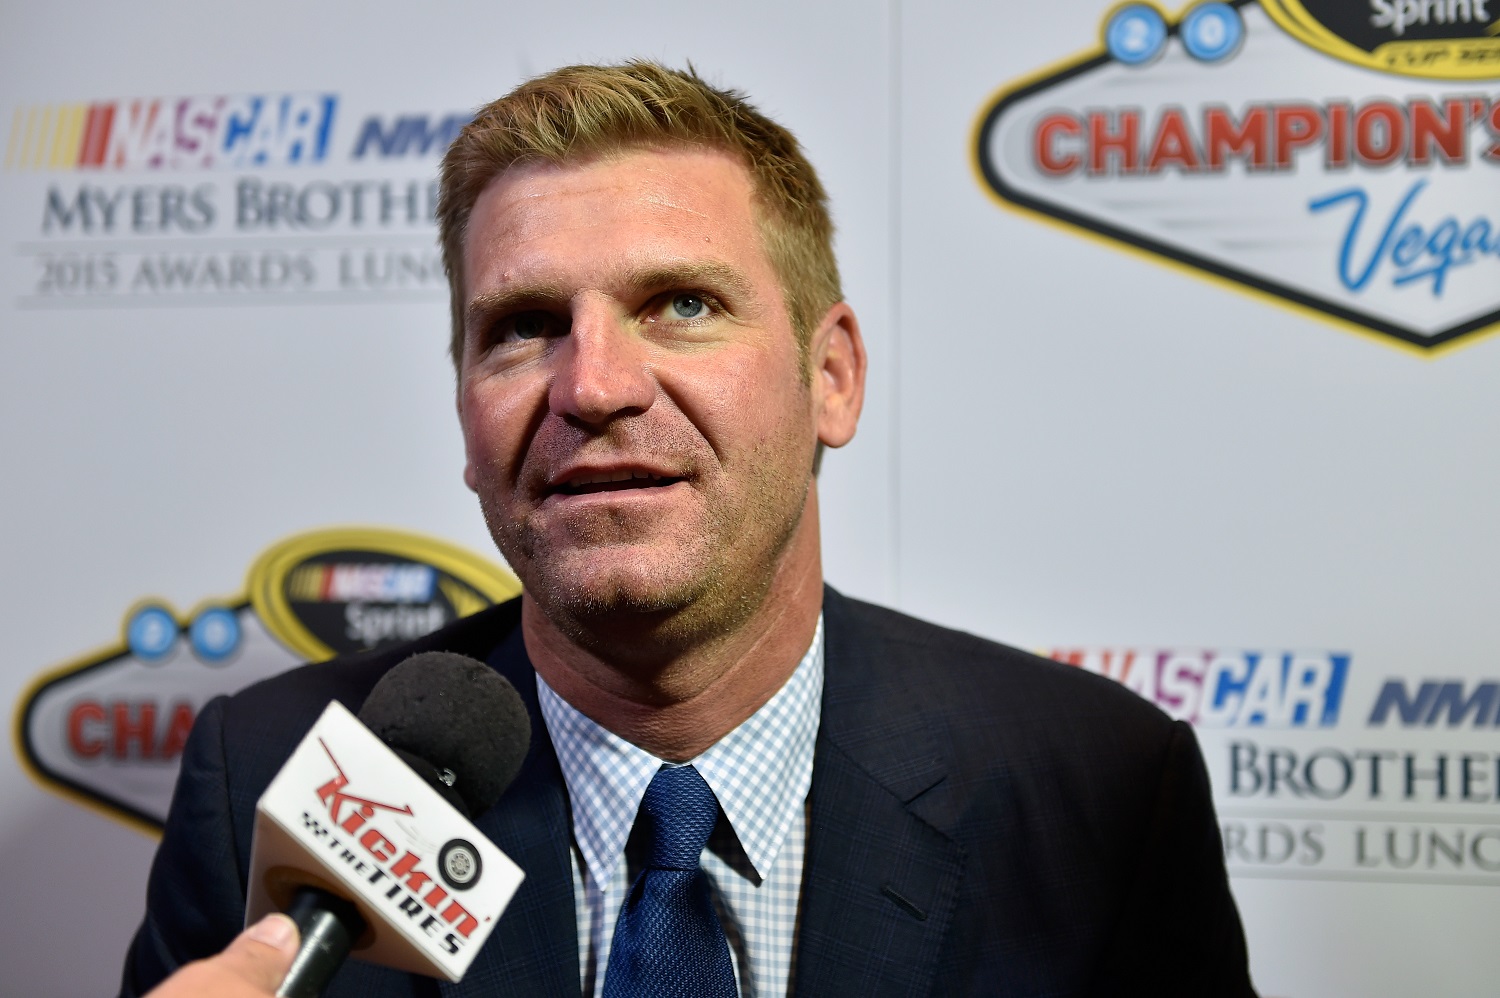 NASCAR driver Clint Bowyer speaks with the media following the 2015 NASCAR NMPA Myers Brothers Awards Luncheon at Encore Las Vegas on Dec. 3, 2015.